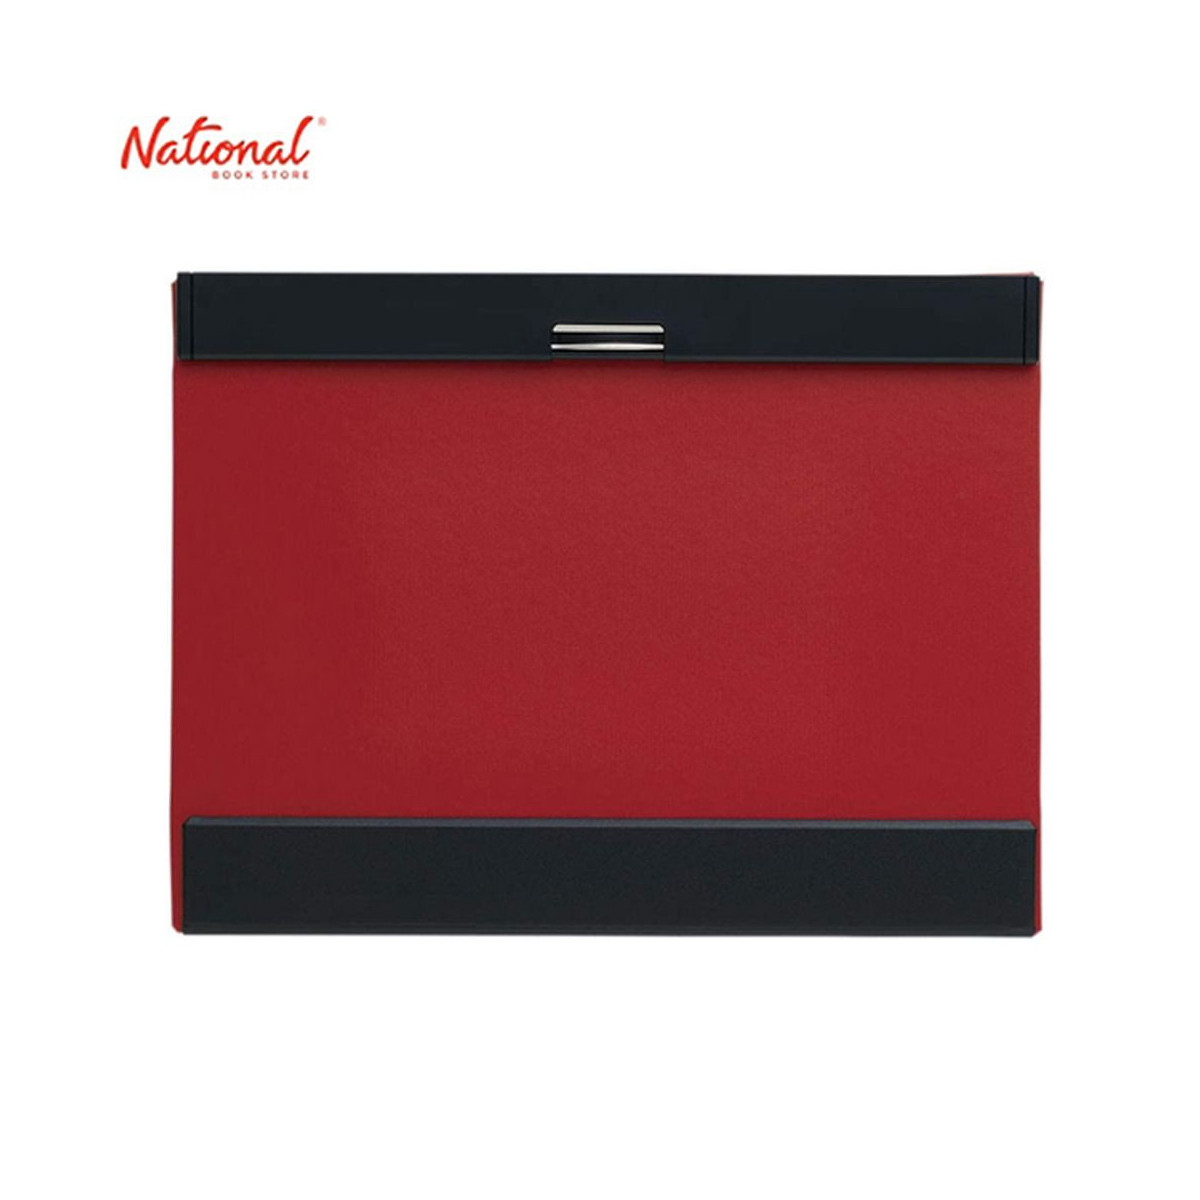 King Jim Clipboard 5075 A4 Red